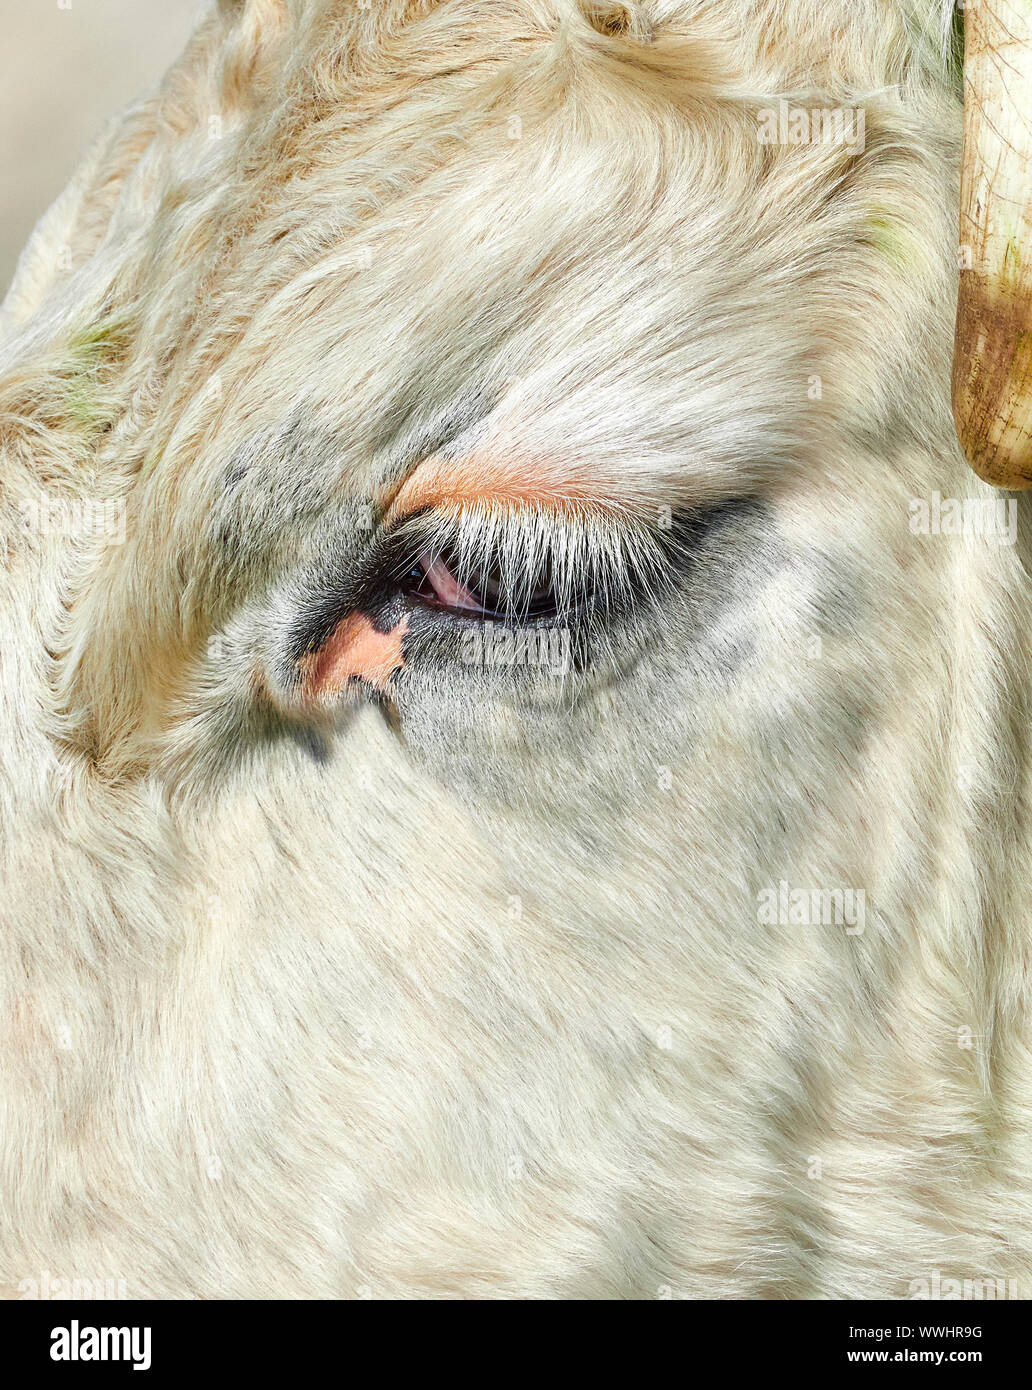 Close up of the face and eye of a Black Hereford cattle Stock Photo